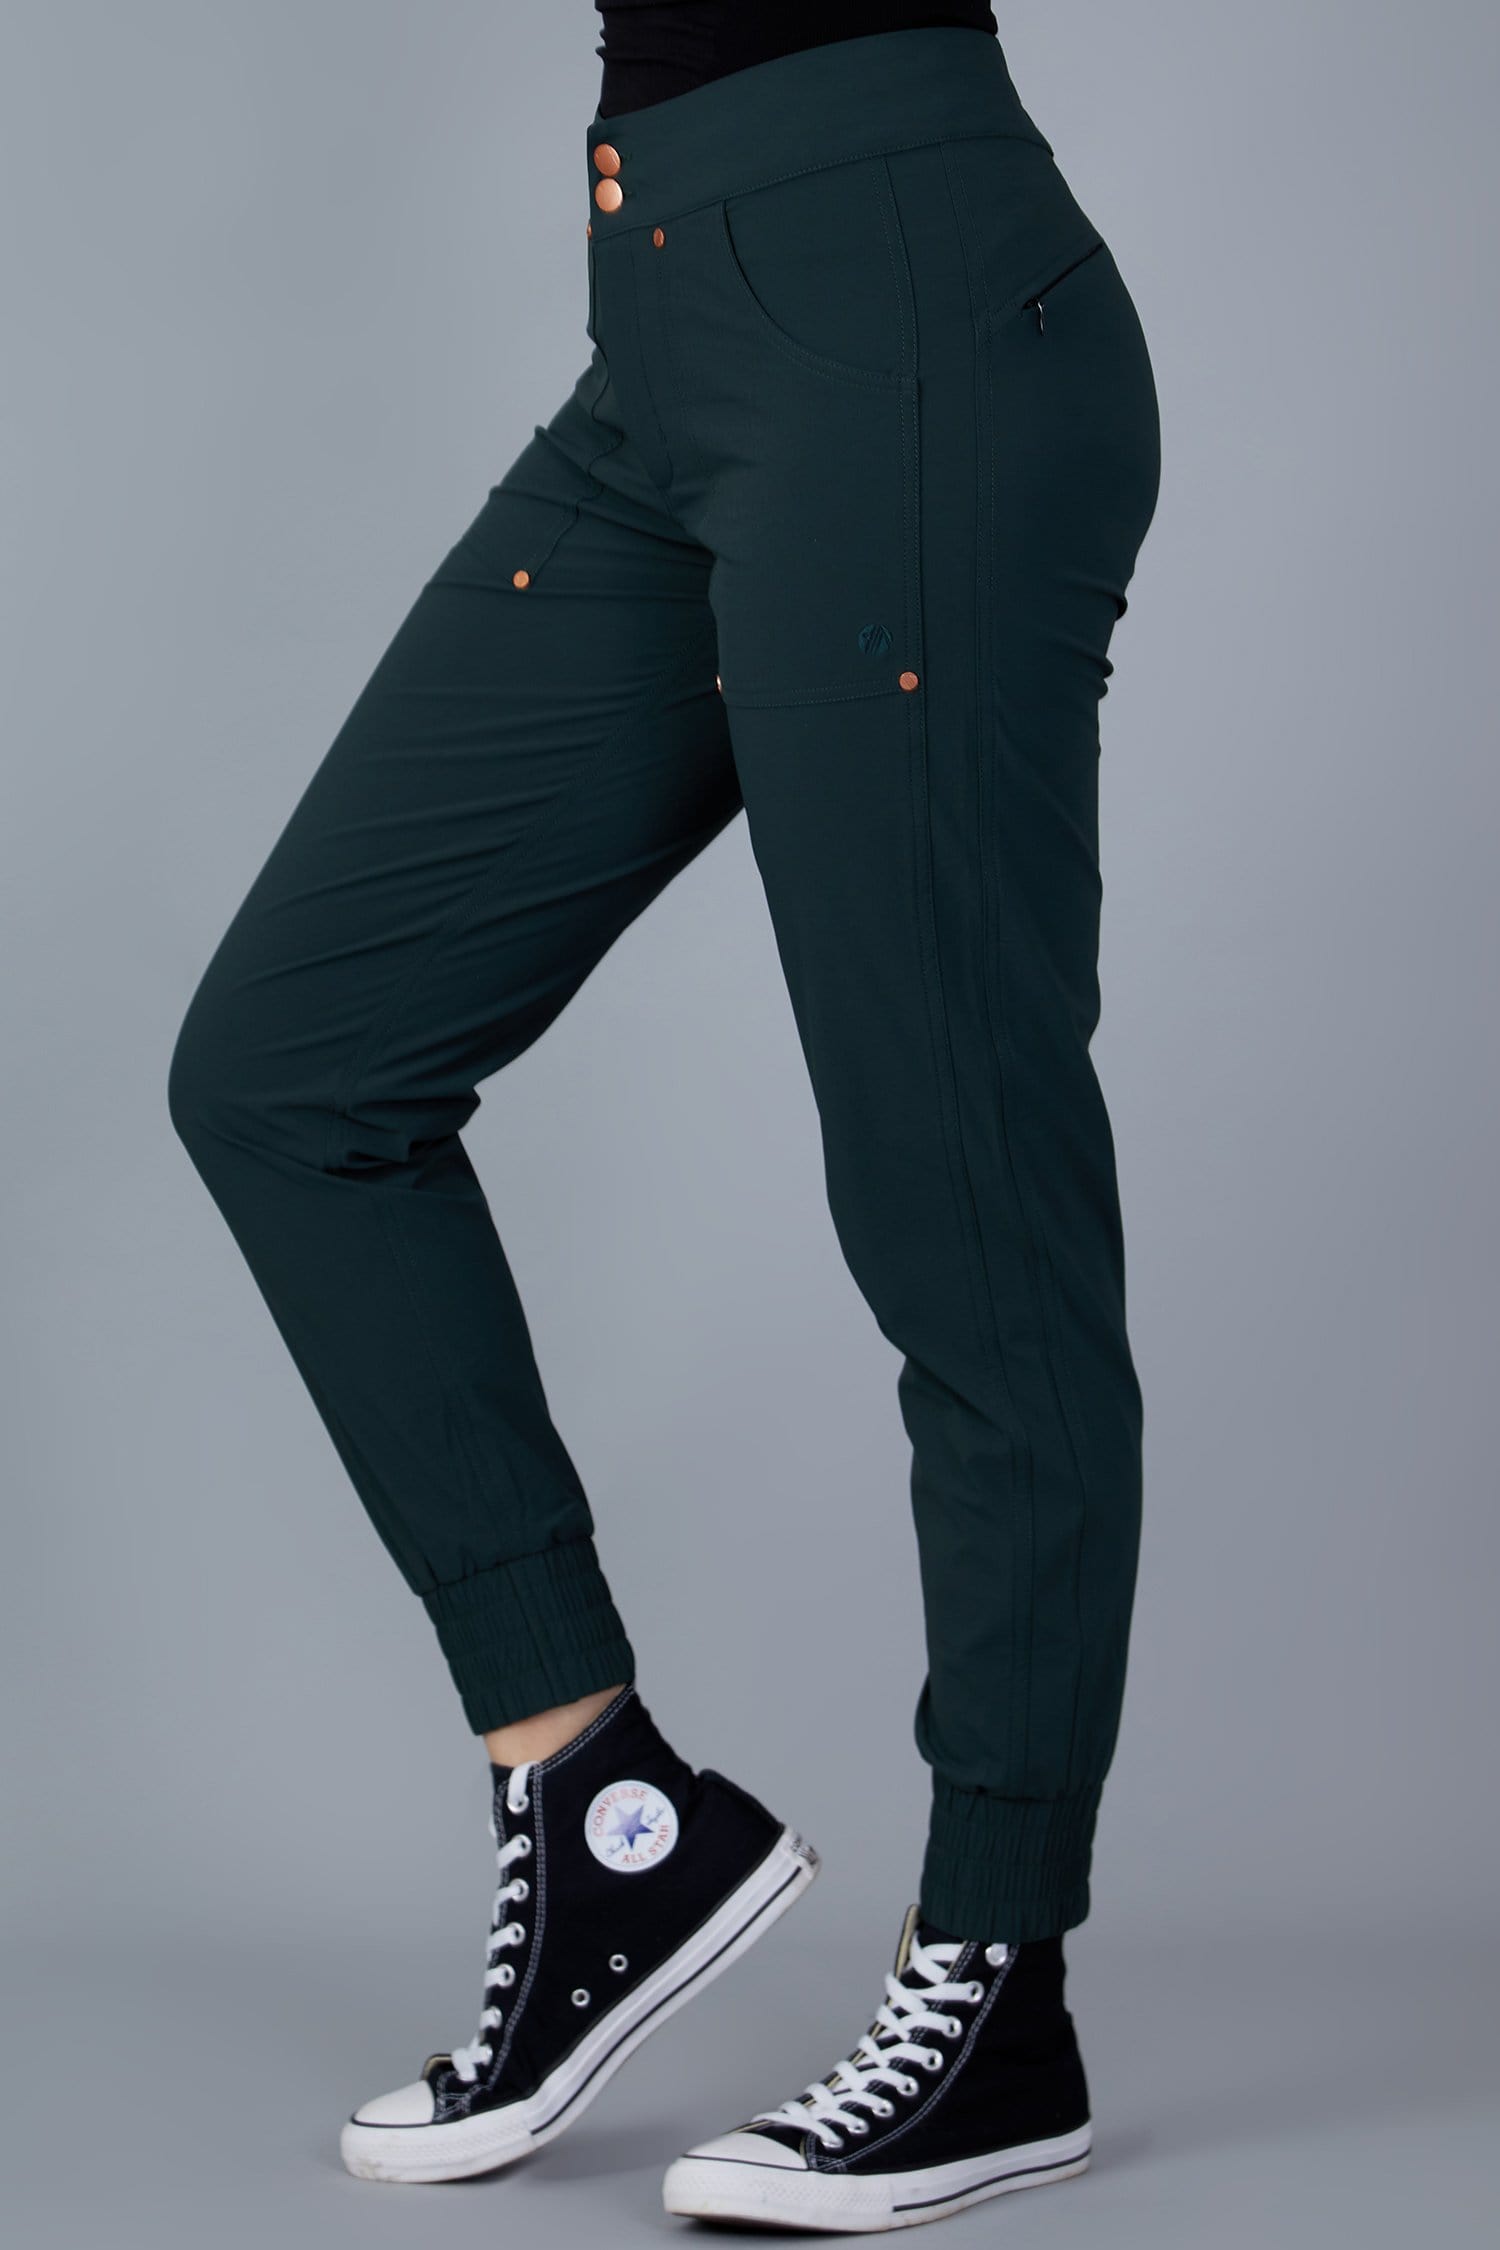 Casual Stroll Pants - Forest Green - 28r / Uk10 - Womens - Acai Outdoorwear